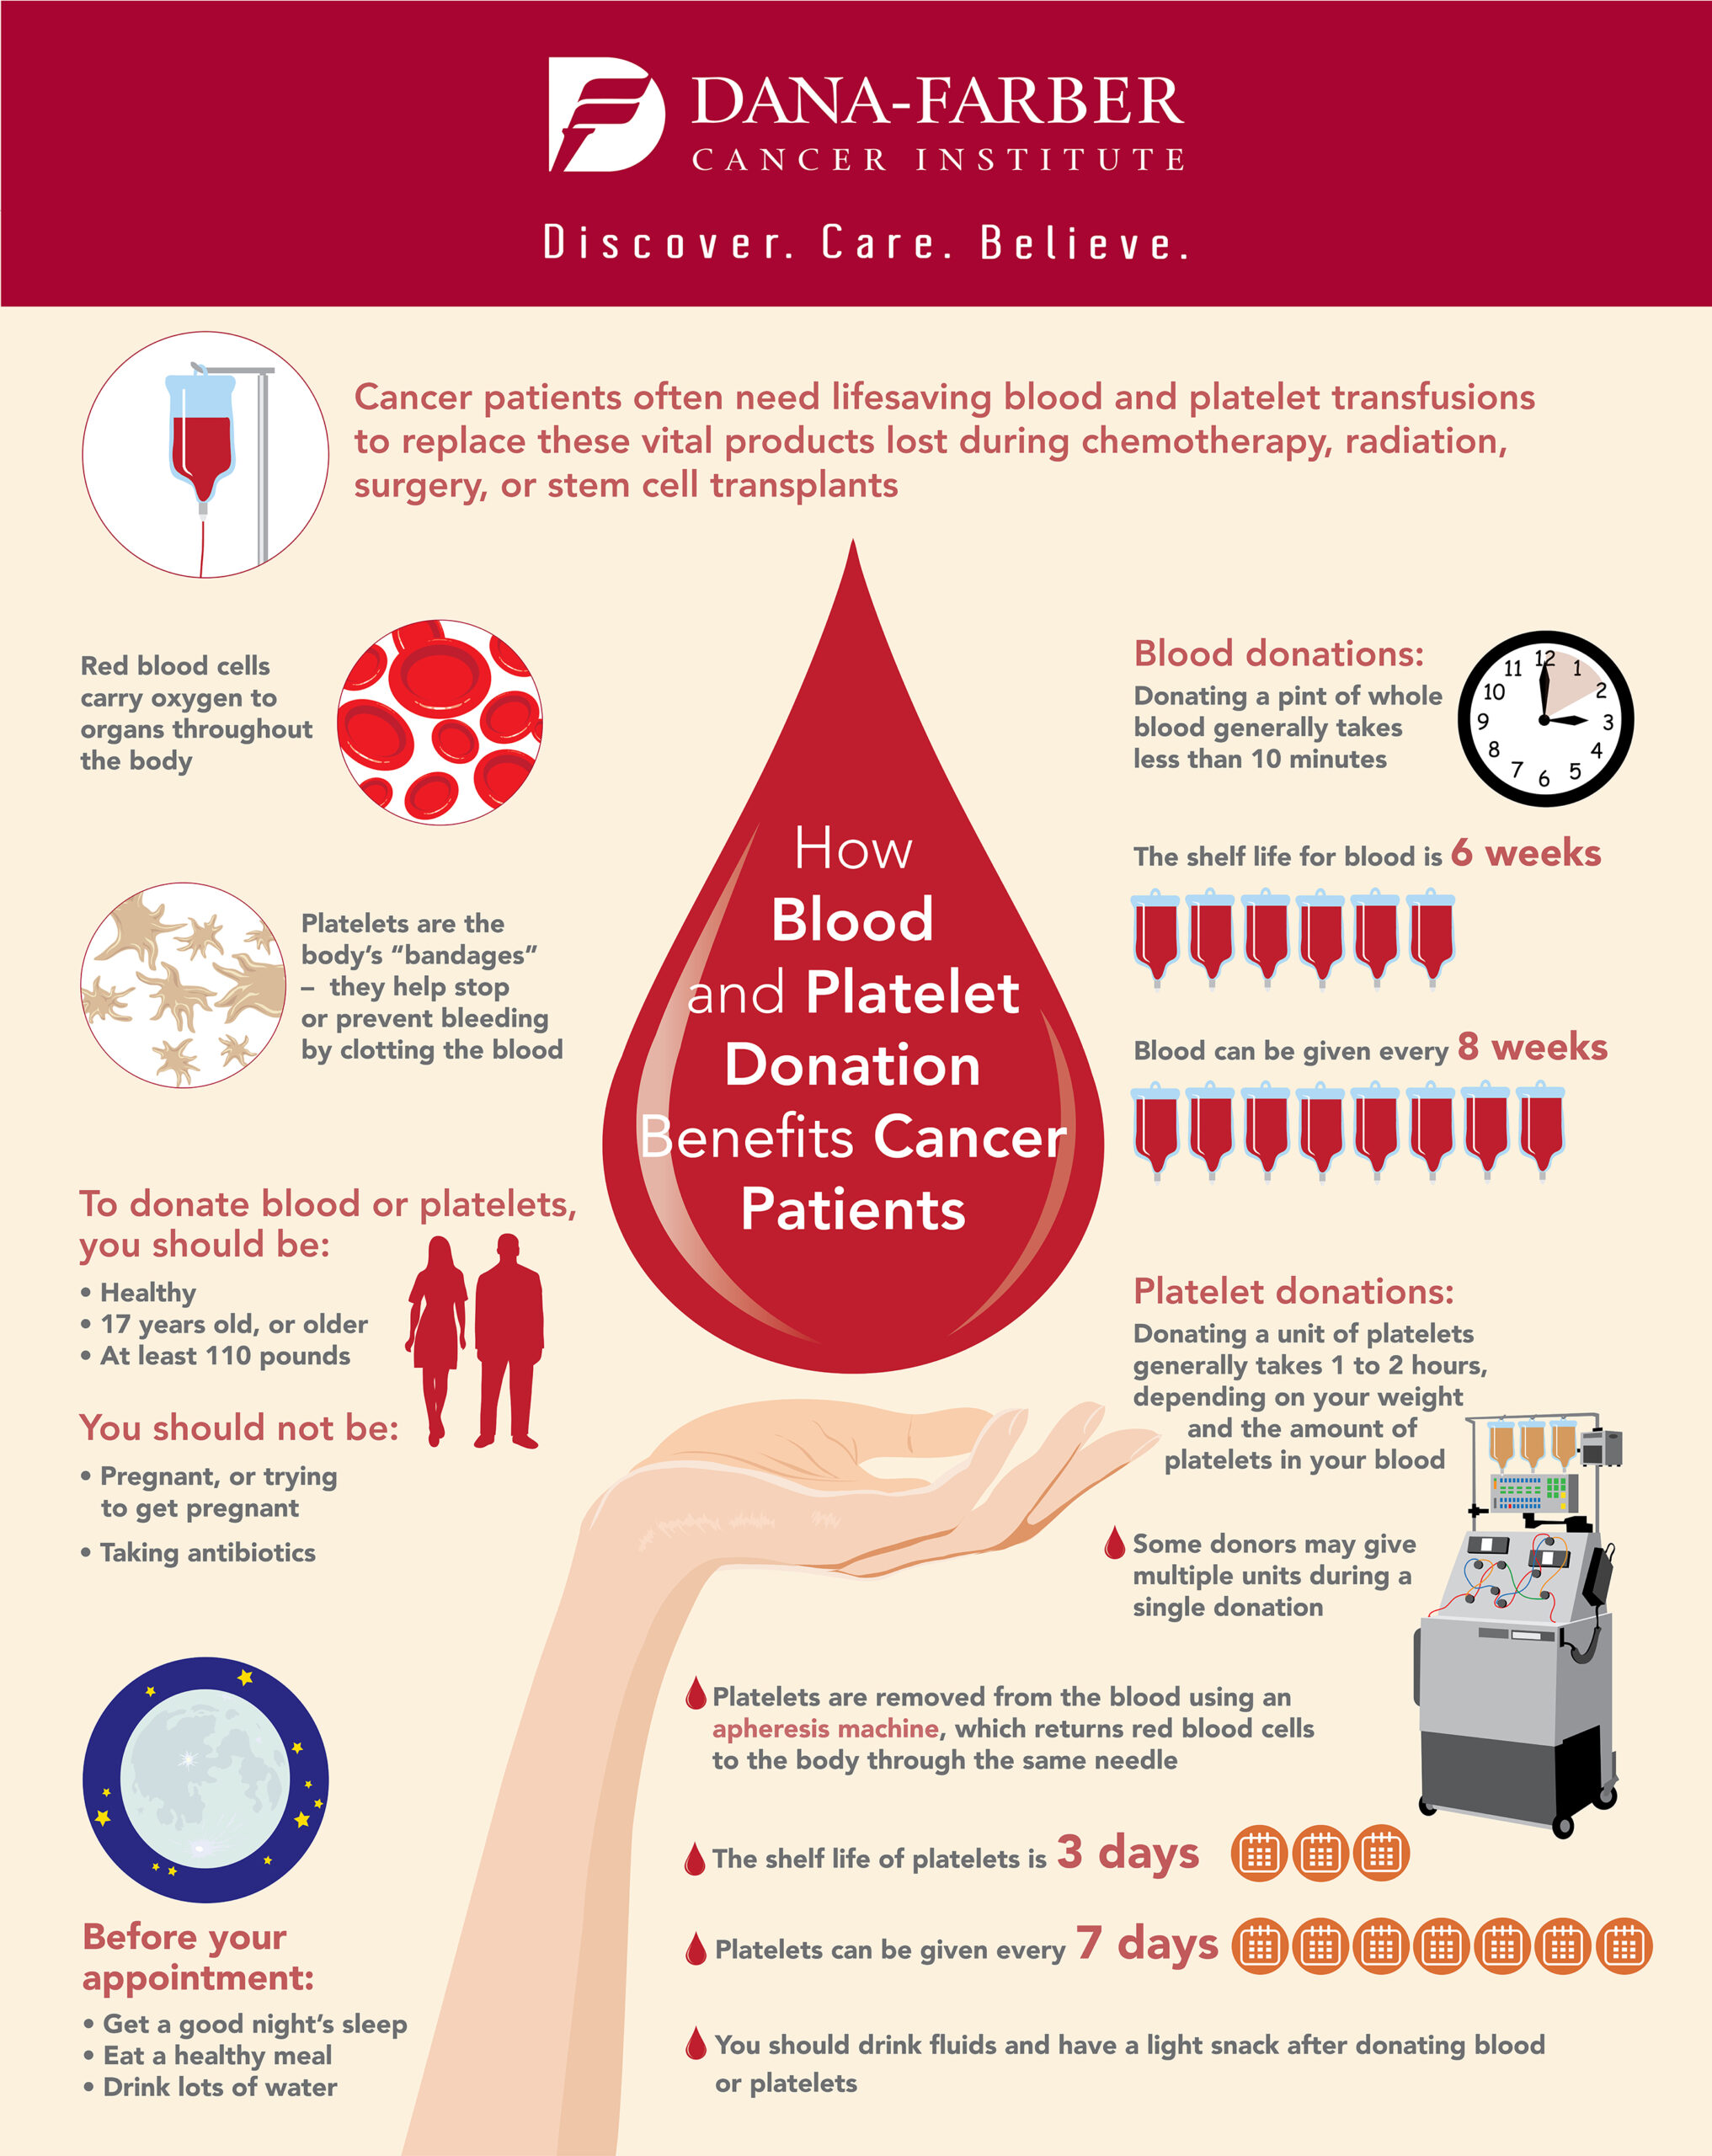 Making A Difference: How Often Can You Donate Blood?